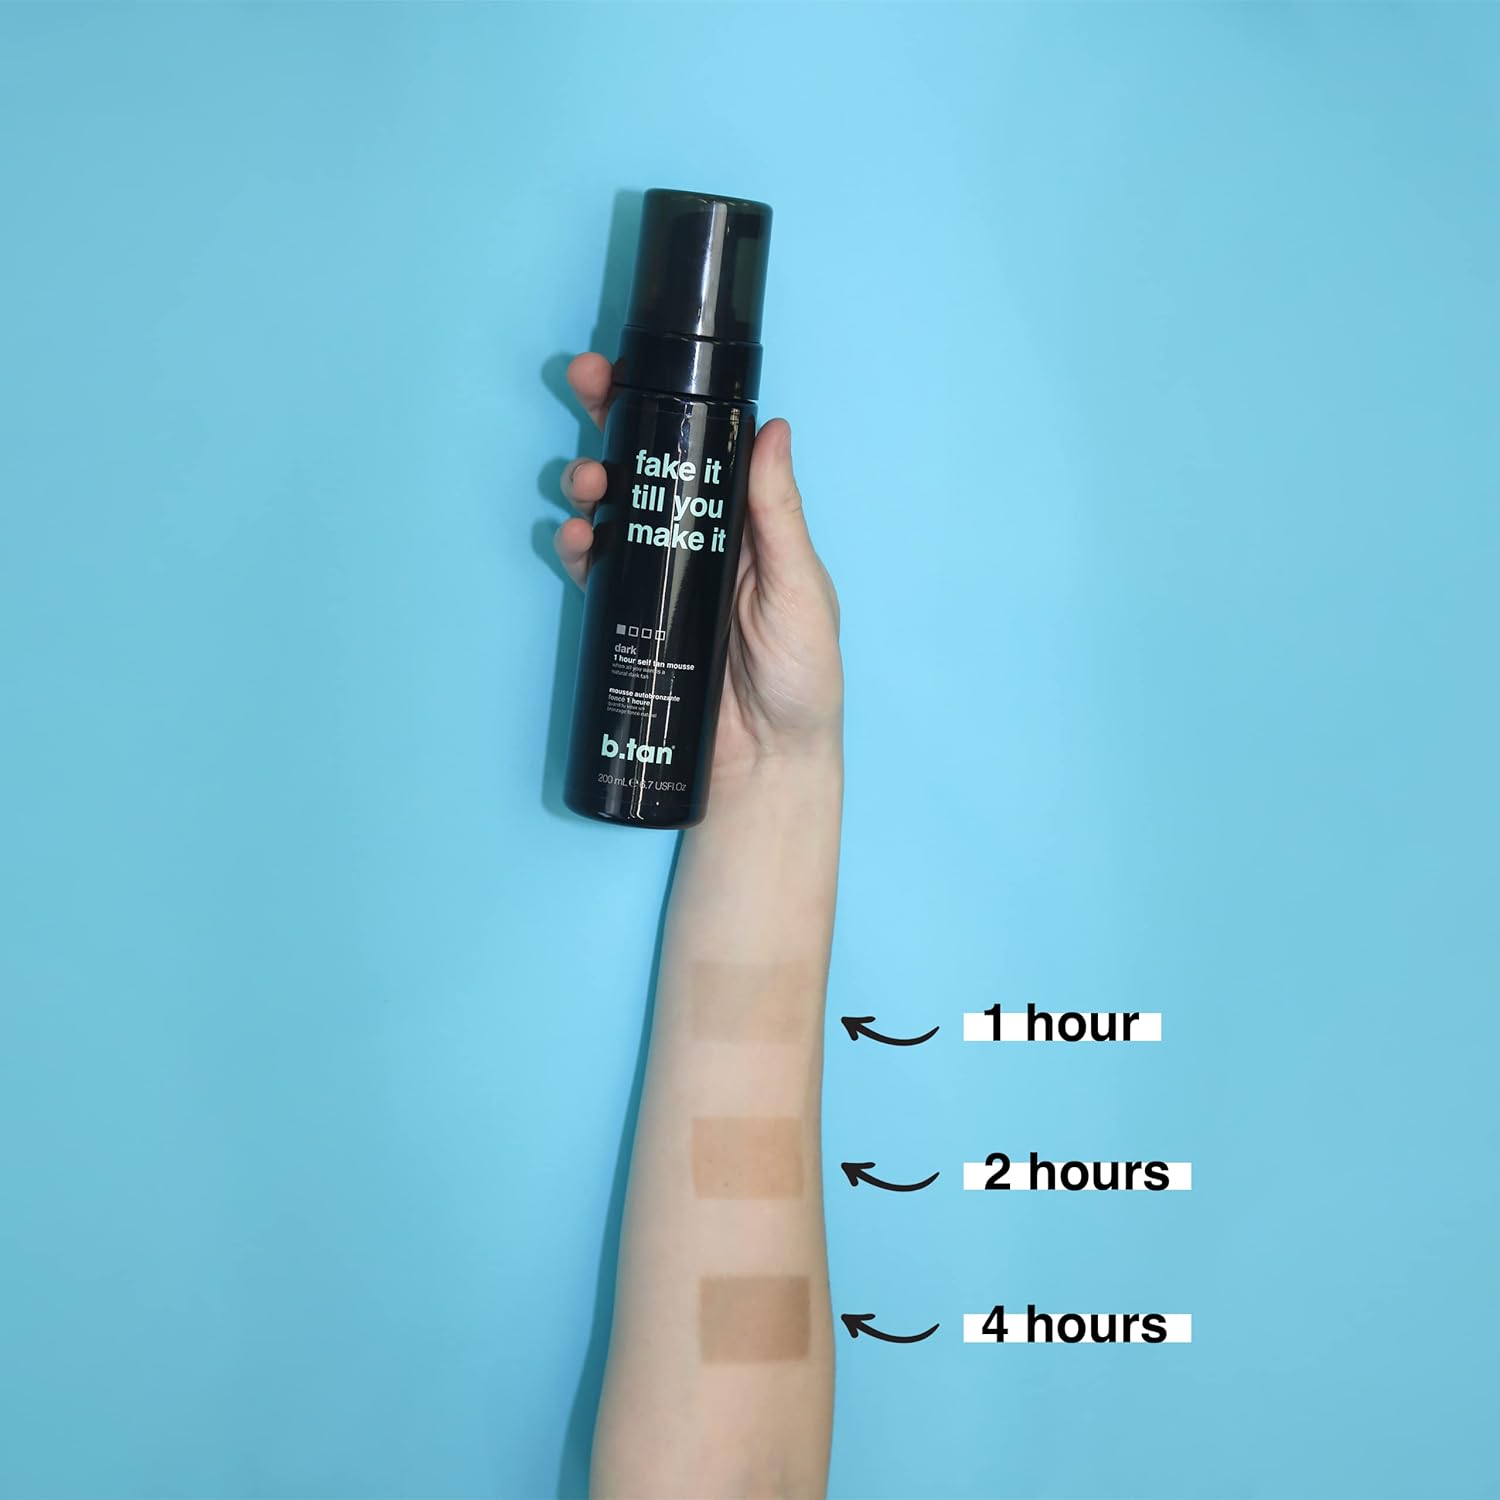 b.tan Dark Self Tanner | Fake It Till You Make It - Fast, 1 Hour Sunless Tanner Mousse, No Fake Tan Smell, No Added Nasties, Vegan, Cruelty Free, 6.7 Fl Oz : Beauty & Personal Care